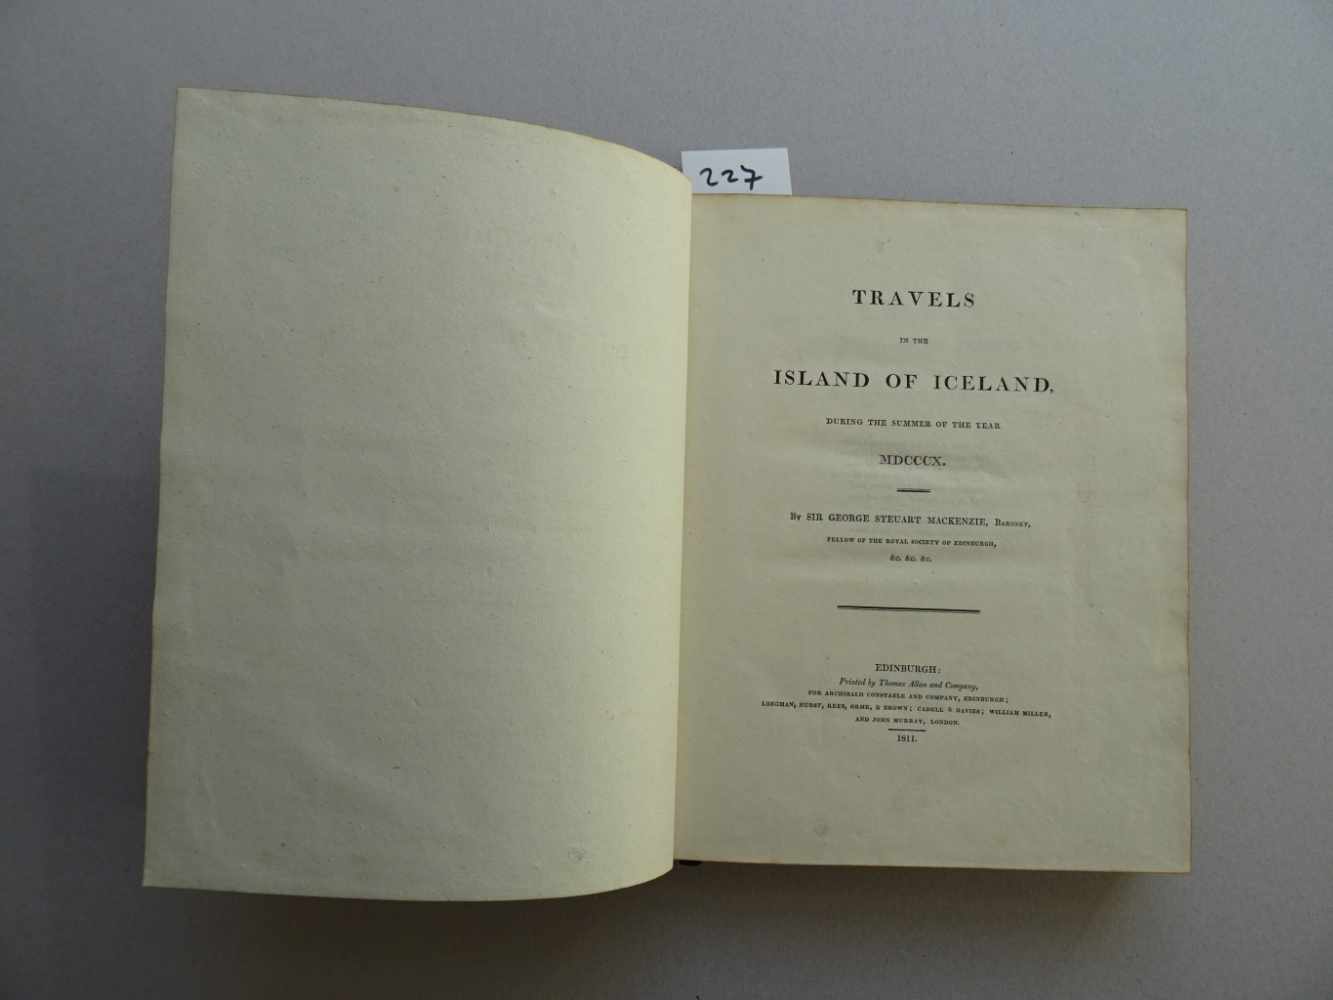 Polargebiete.- Mackenzie, G.S.Travels in the Island of Iceland, during the Summer of the Year MDCCCX - Image 2 of 7